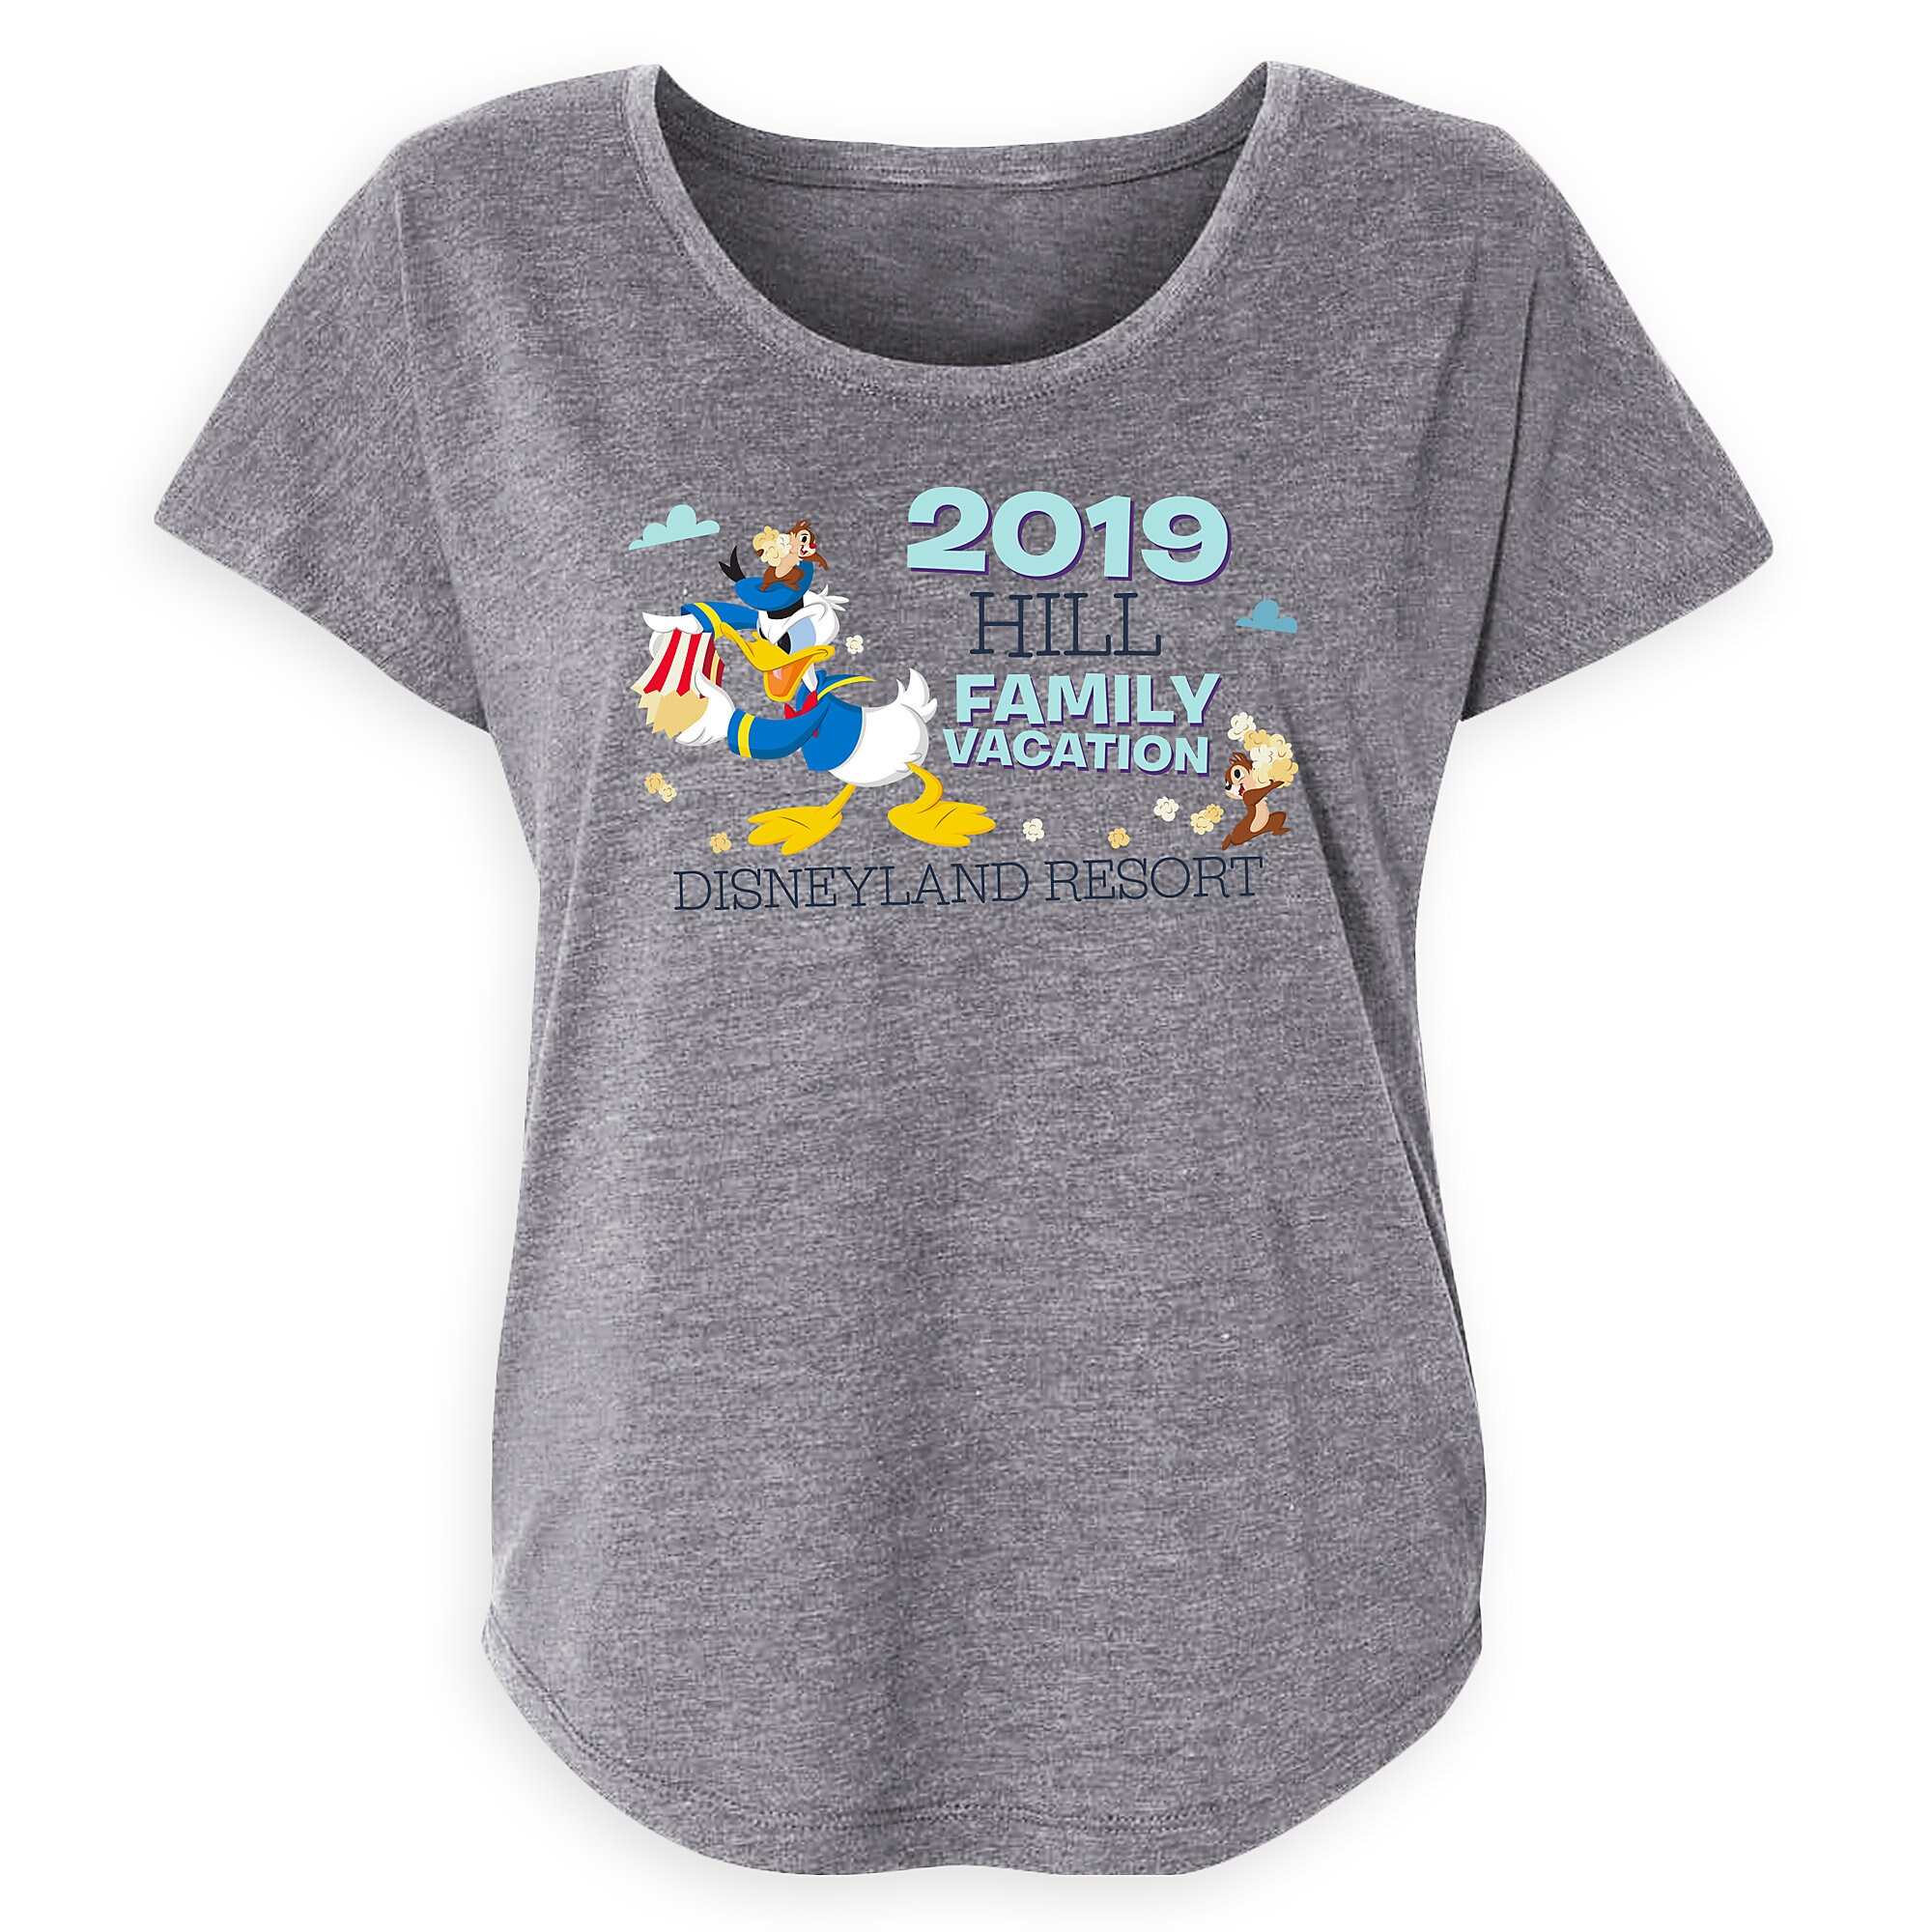 Women's Donald Duck and Chip 'n Dale Family Vacation T-Shirt - Disneyland Resort - Customized